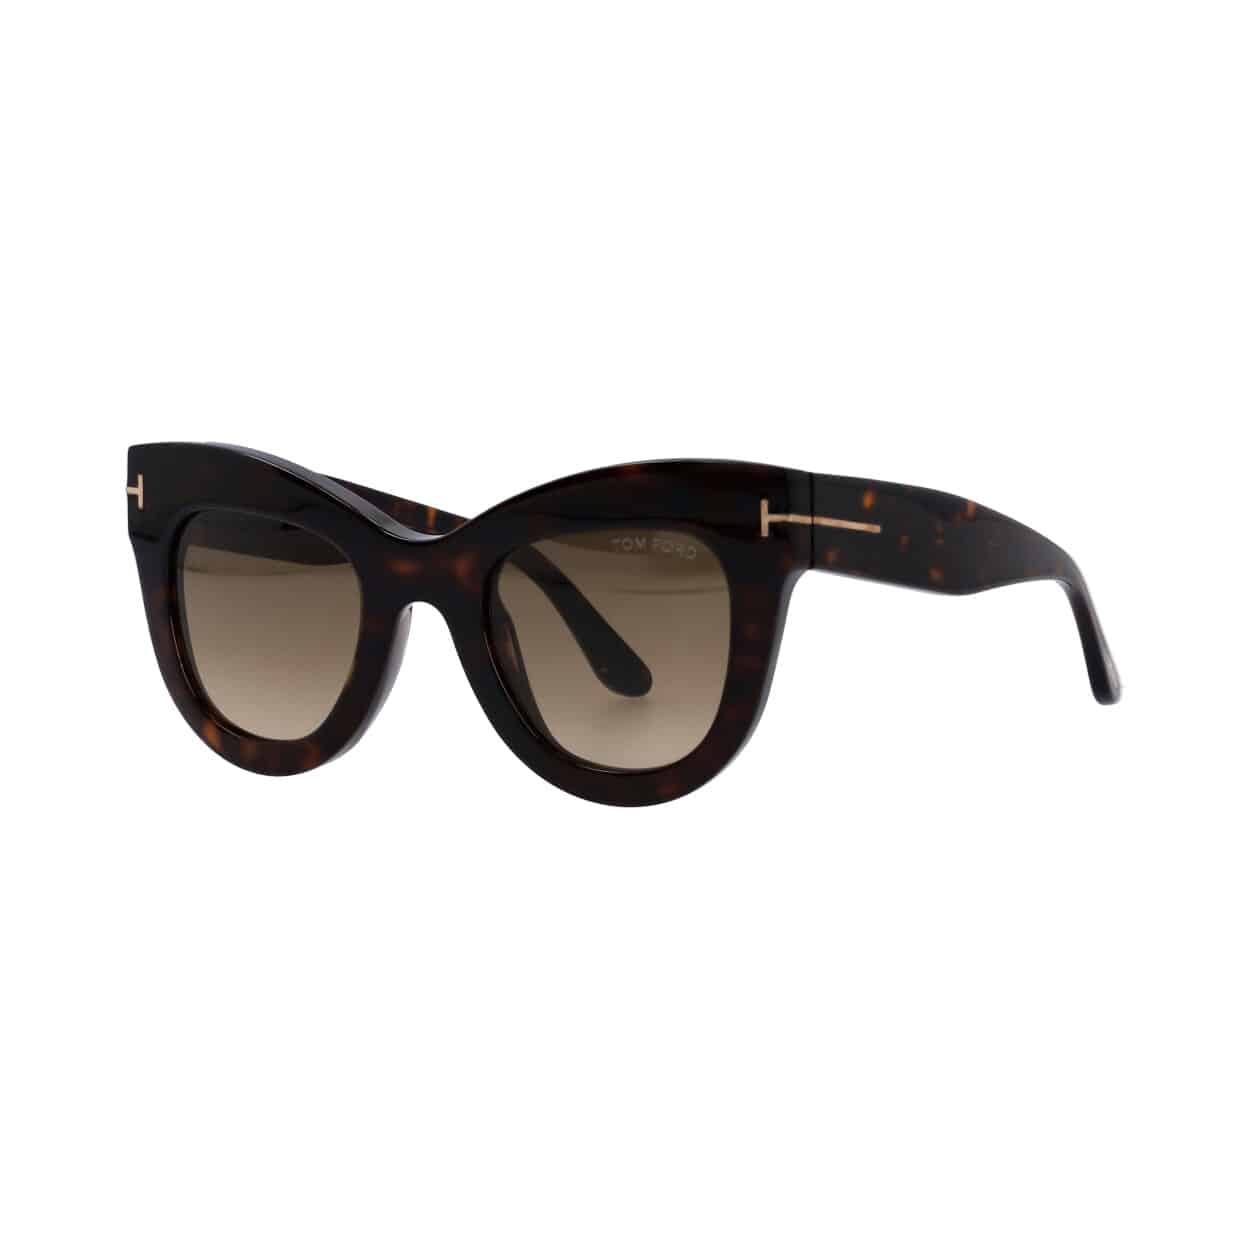 TOM FORD Sunglasses Karina-02 TF612 Brown | Luxity